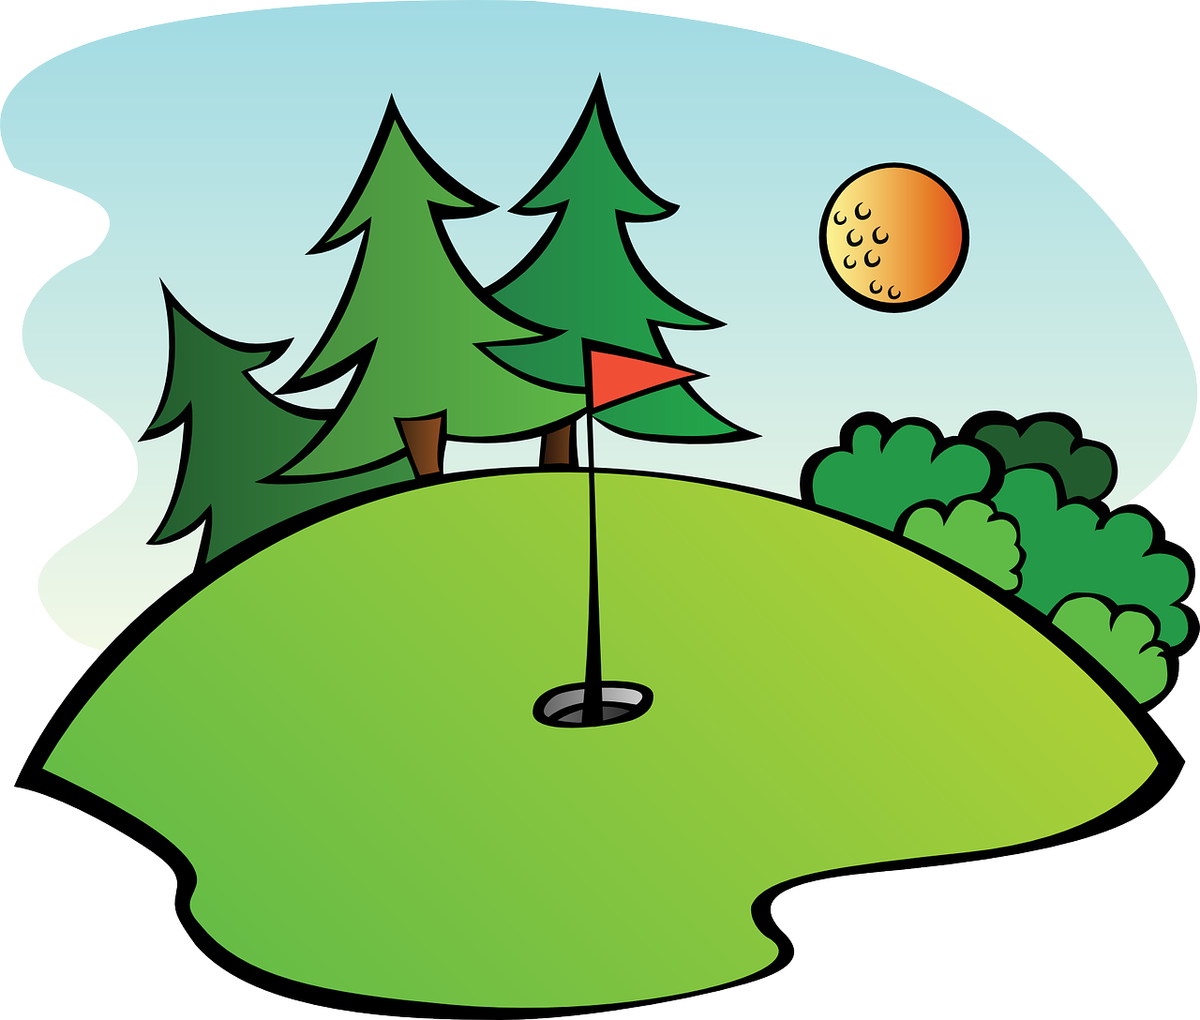 golfer clipart country club